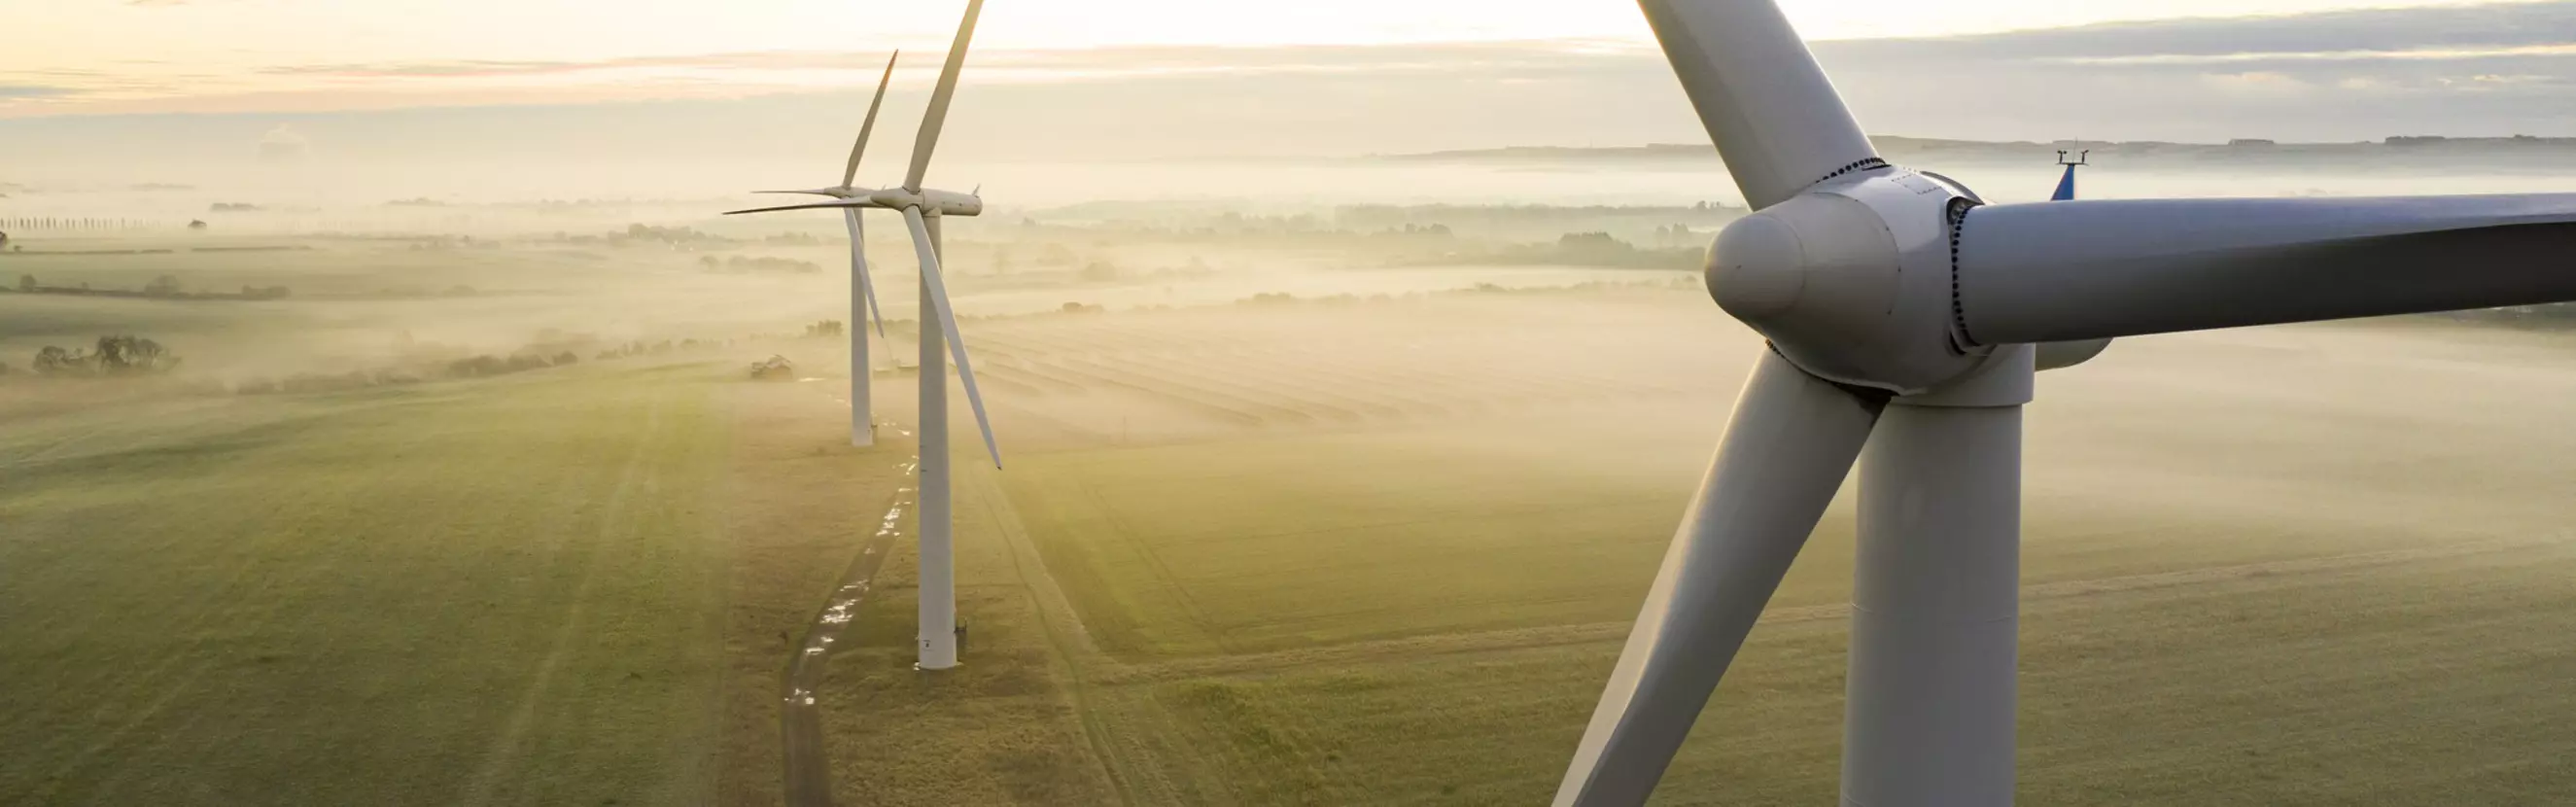 Plug connectors increase the value of wind energy investments